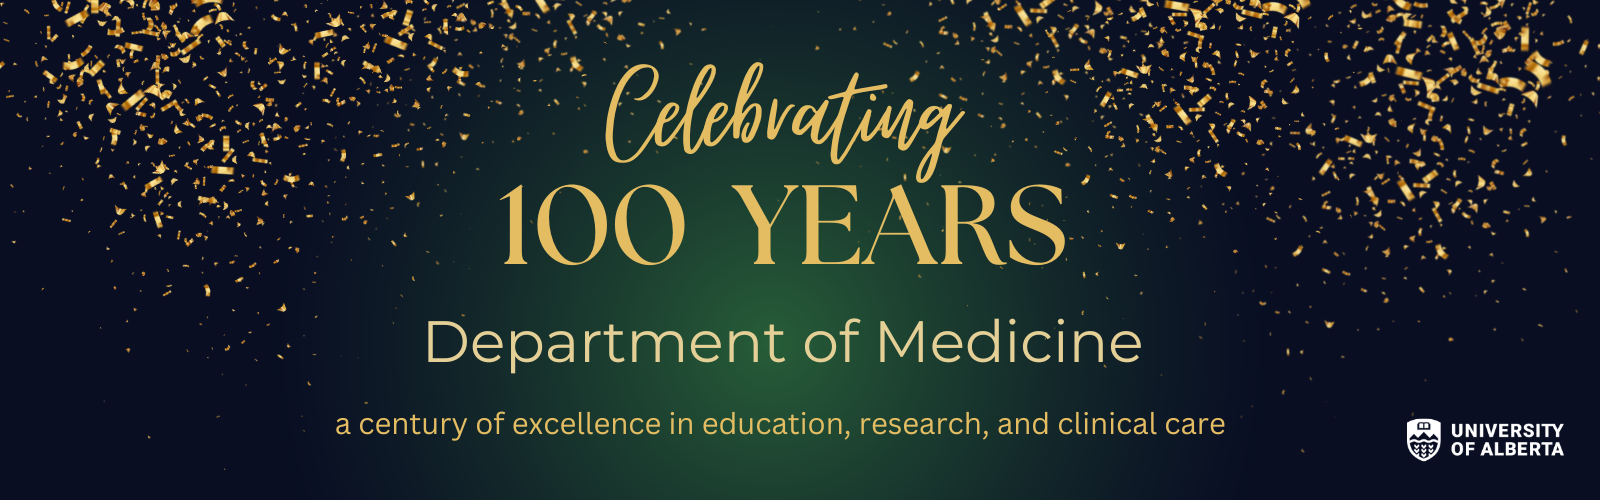 100 Years Anniversary Celebration for the Department of Medicine